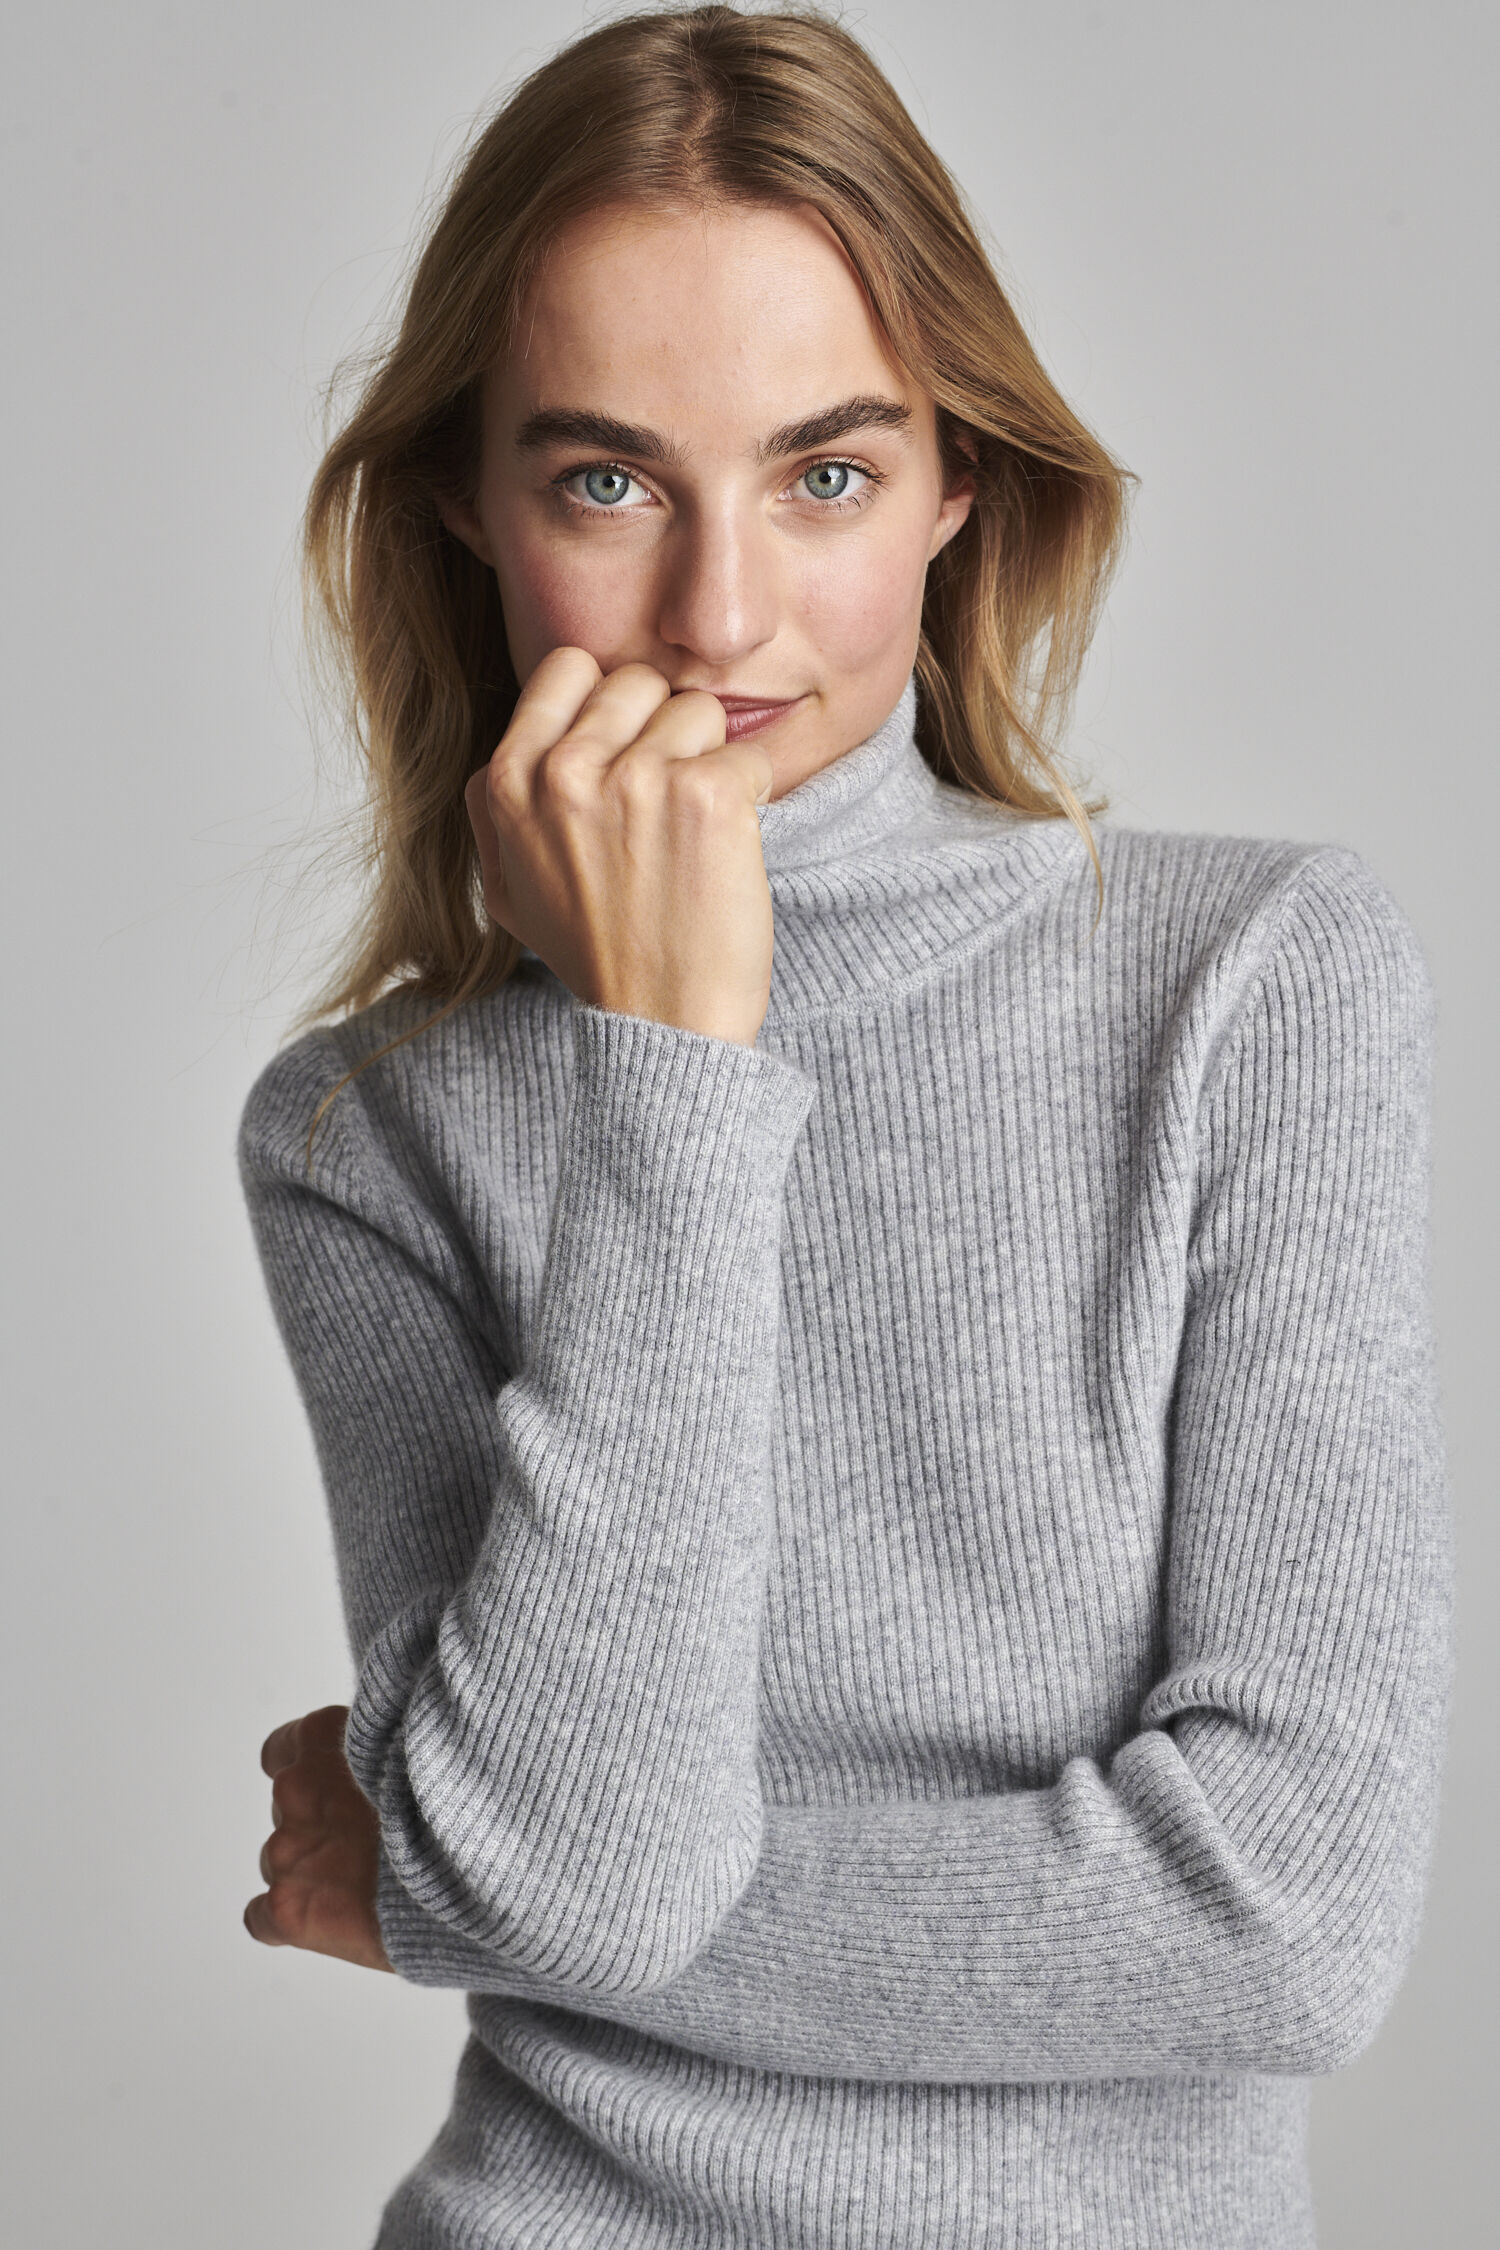 All GoCashmere Products | GoCashmere